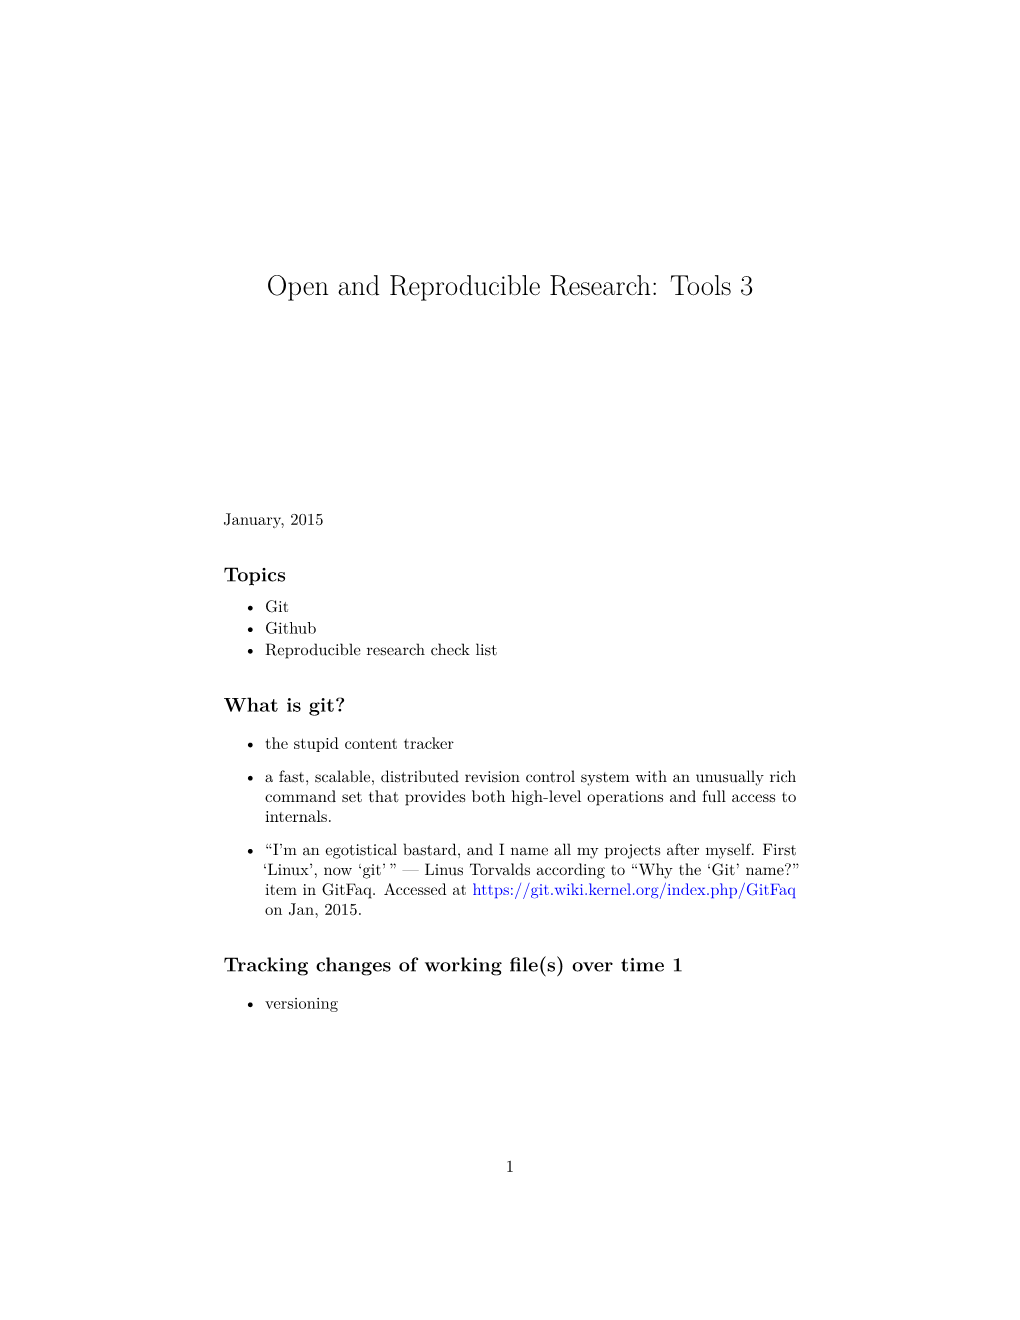 Open and Reproducible Research: Tools 3